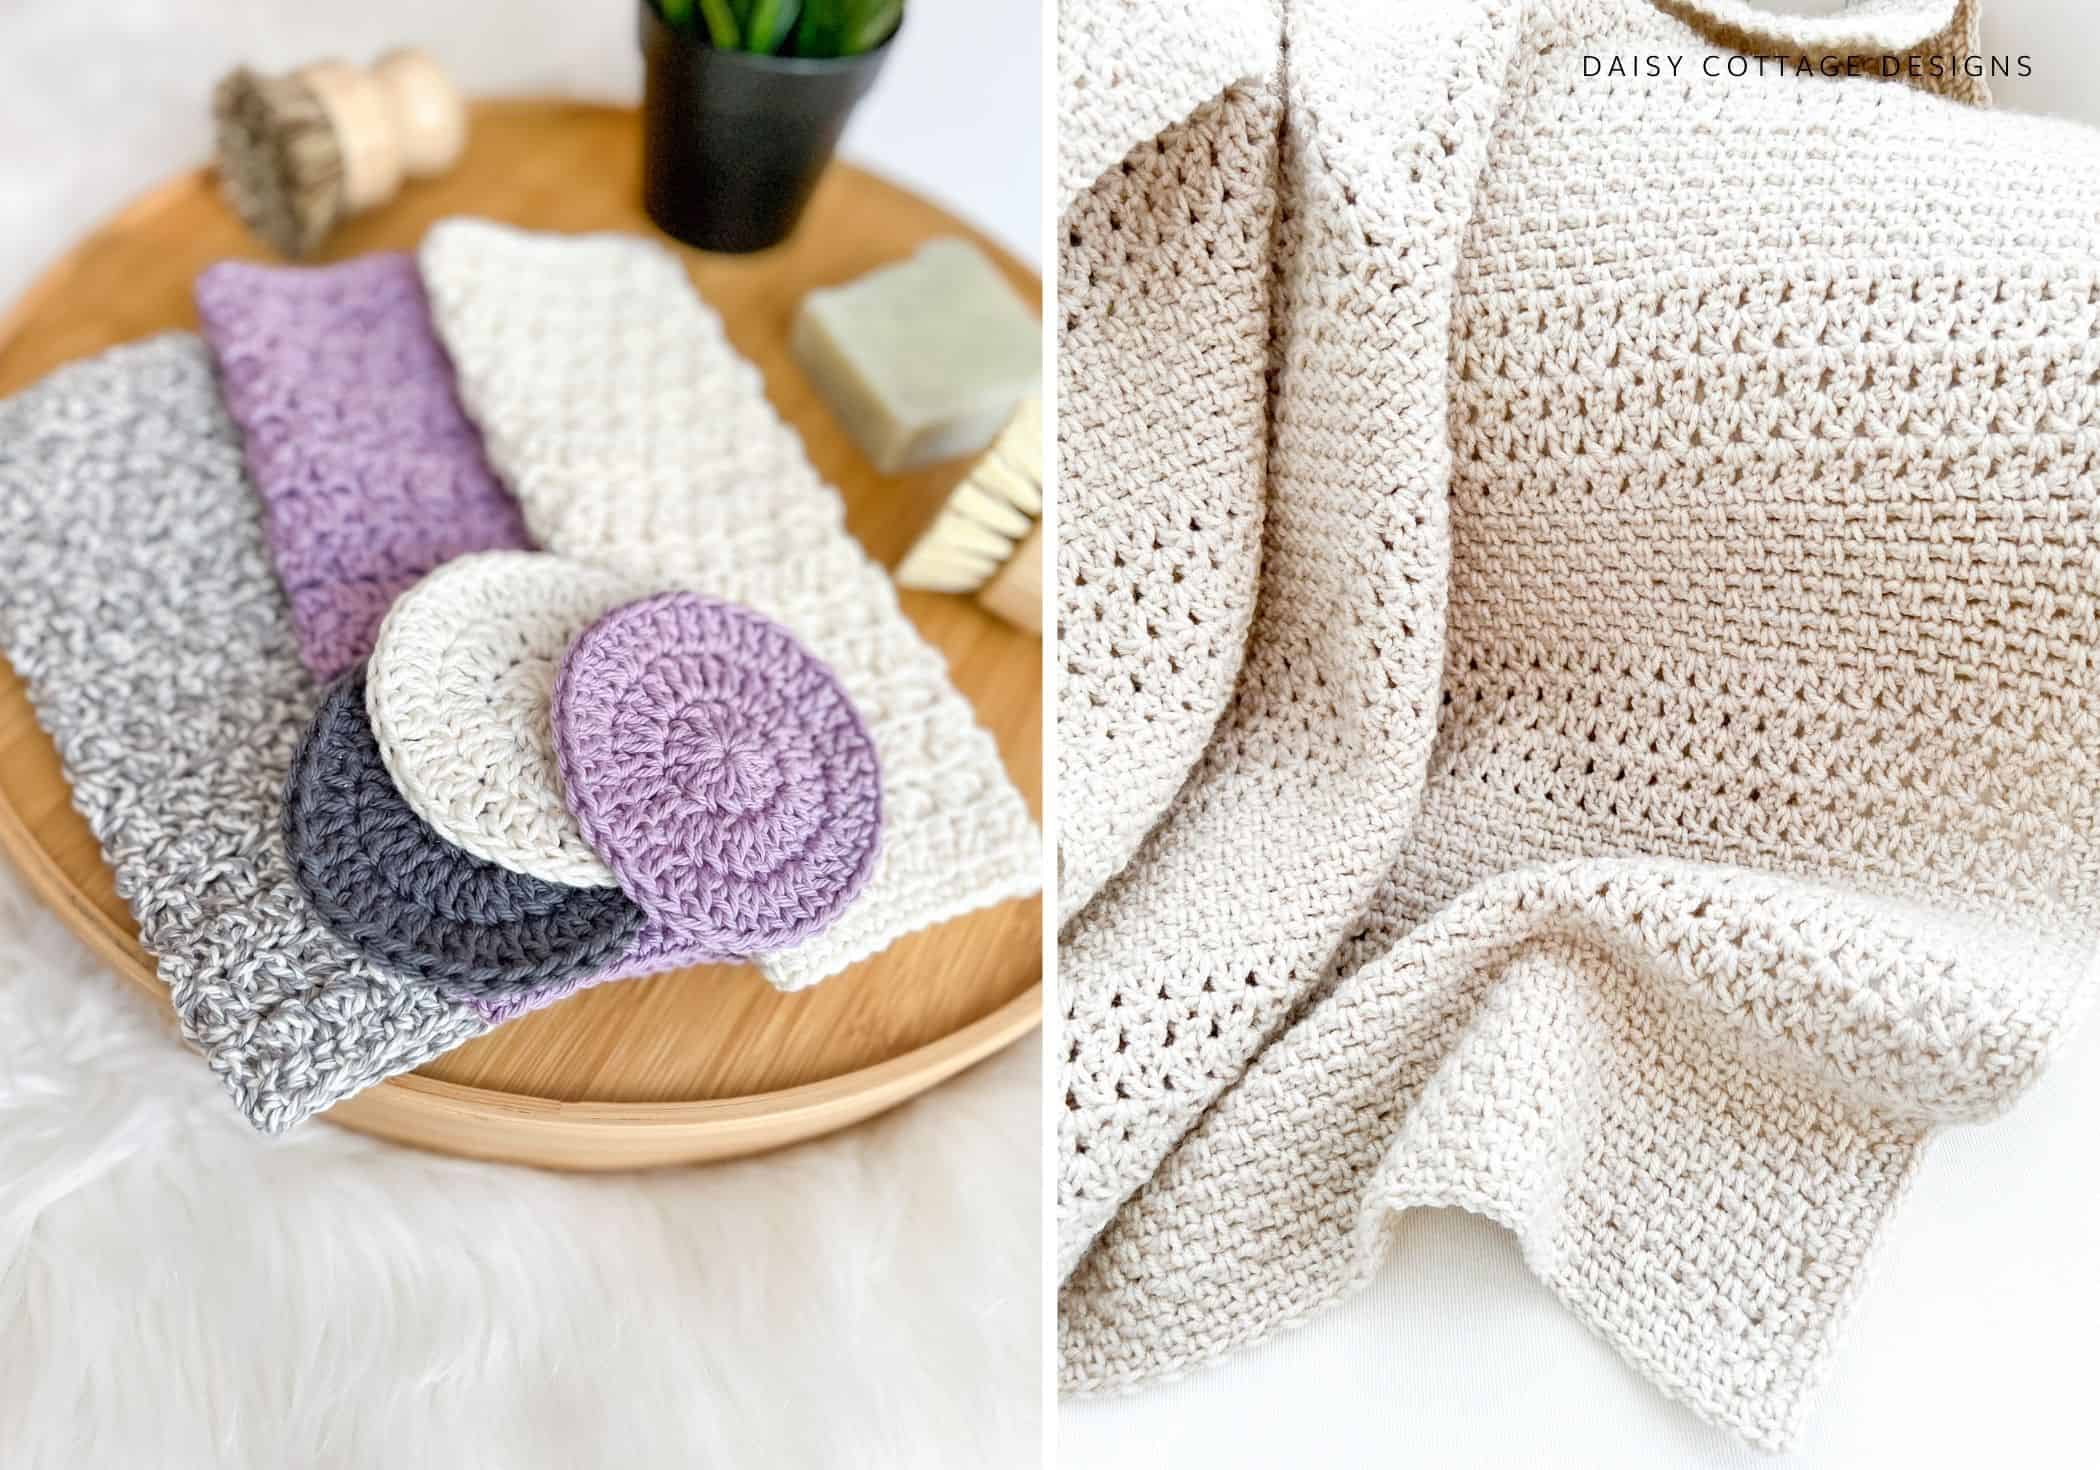 Crochet gifts for people who crochet